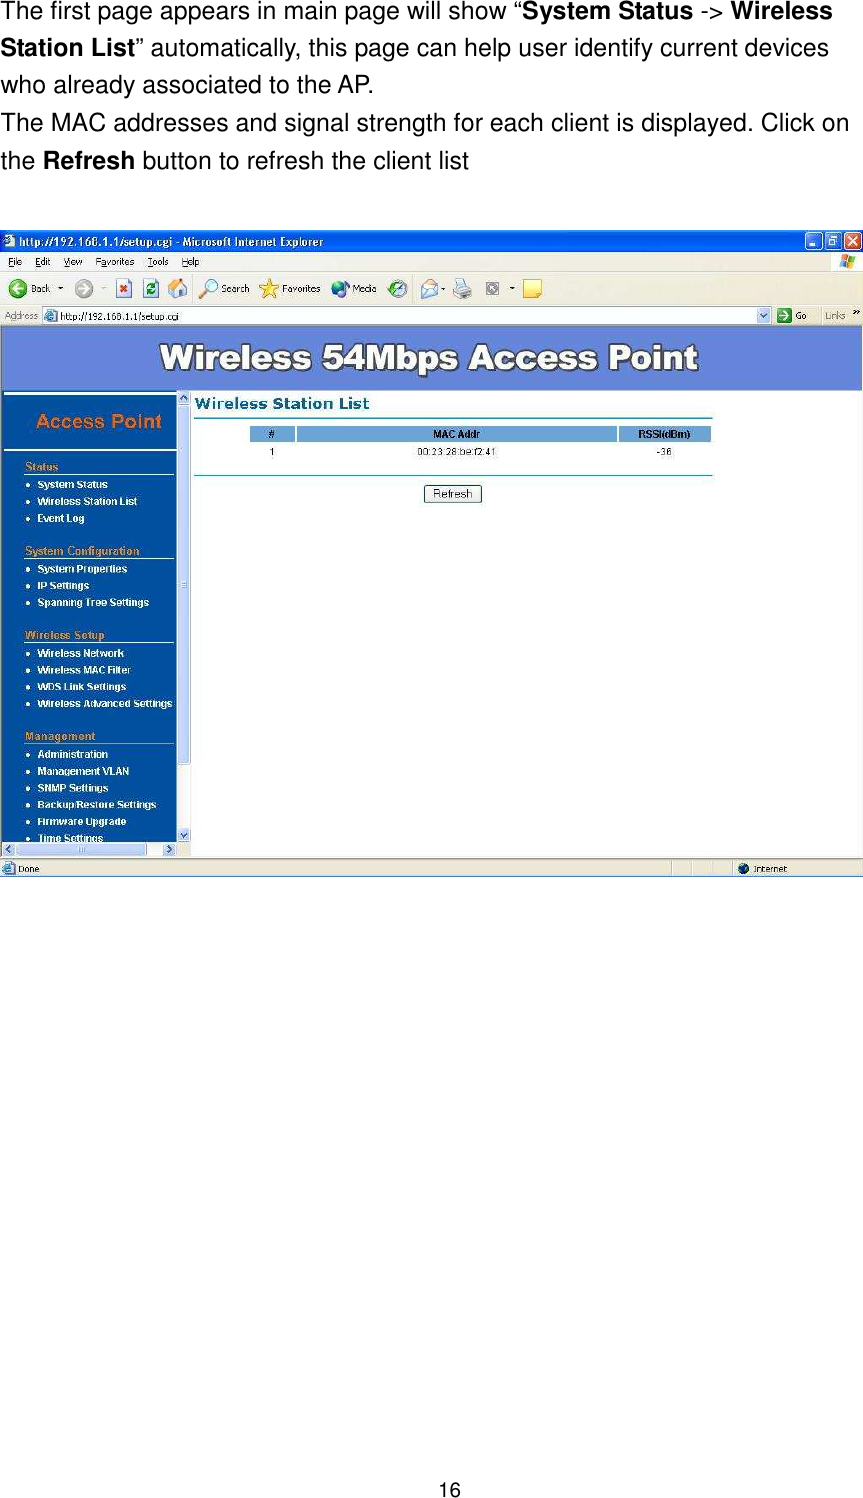  16 The first page appears in main page will show “System Status -&gt; Wireless Station List” automatically, this page can help user identify current devices who already associated to the AP.   The MAC addresses and signal strength for each client is displayed. Click on the Refresh button to refresh the client list                    